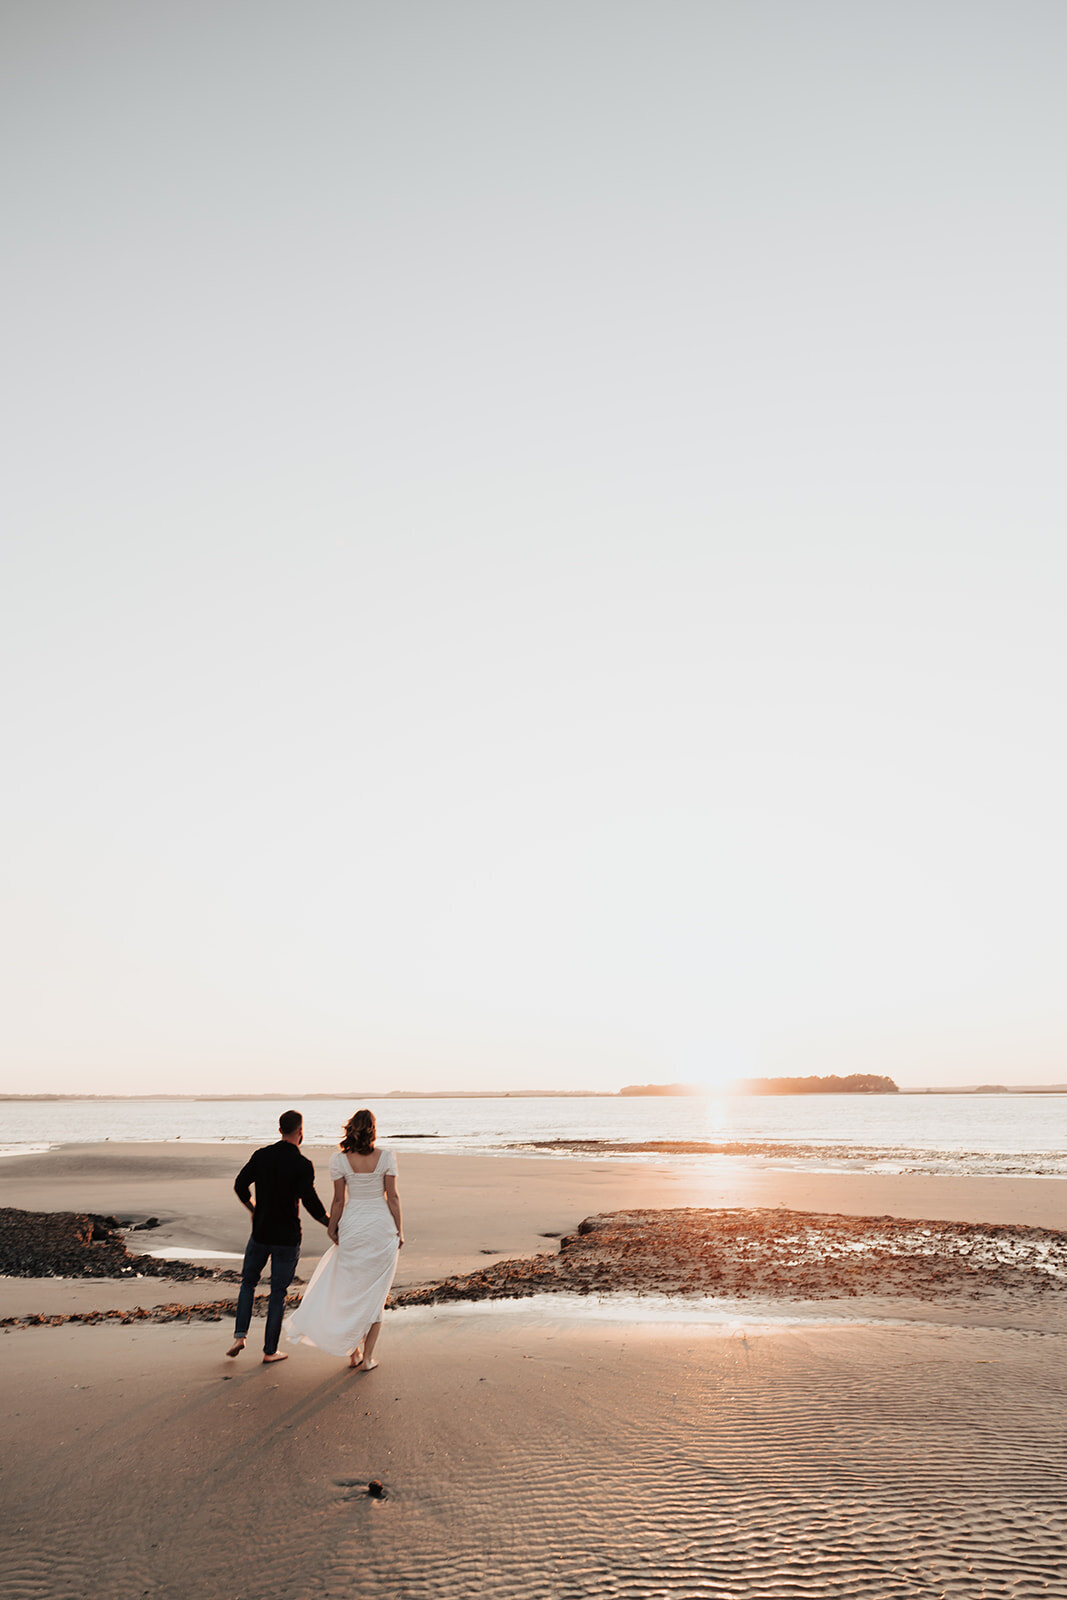 Wide angle photo of engaged couple walking towards ocean. Sun is setting in background. Low tide and low waterline.